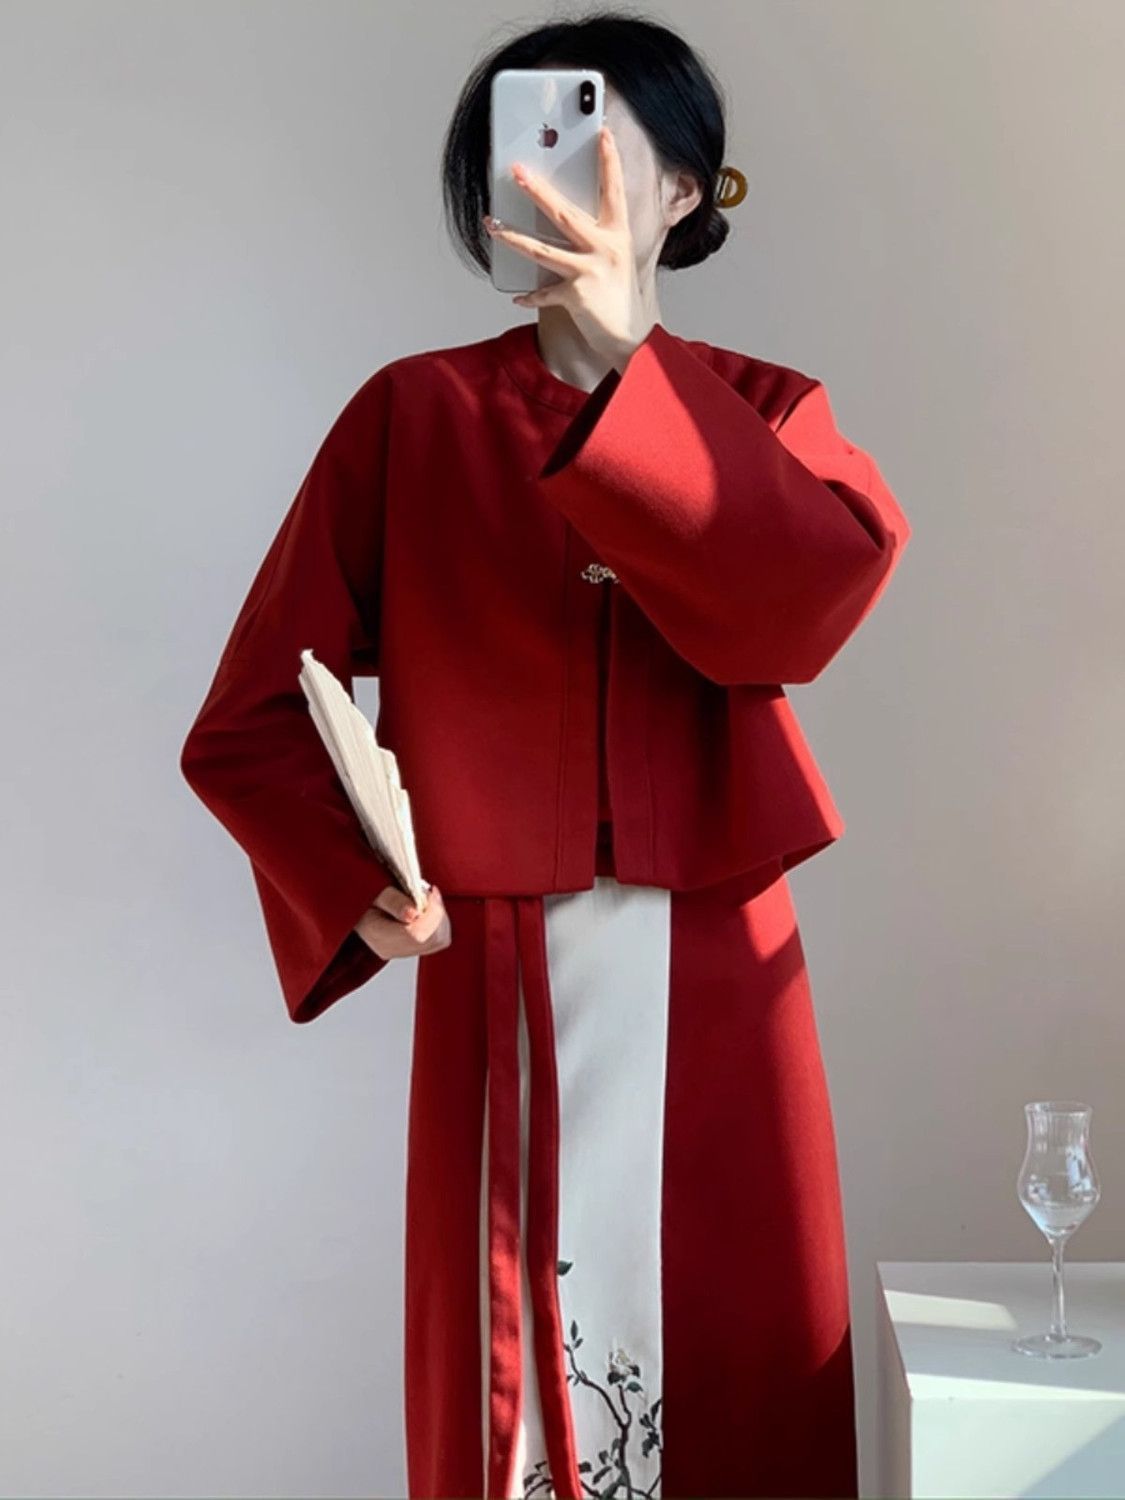 Autumn new style Hanfu made from the Song Dynasty, suitable for women attending weddings, round neck short coats and swirling skirts 2023 autumn and winter suits